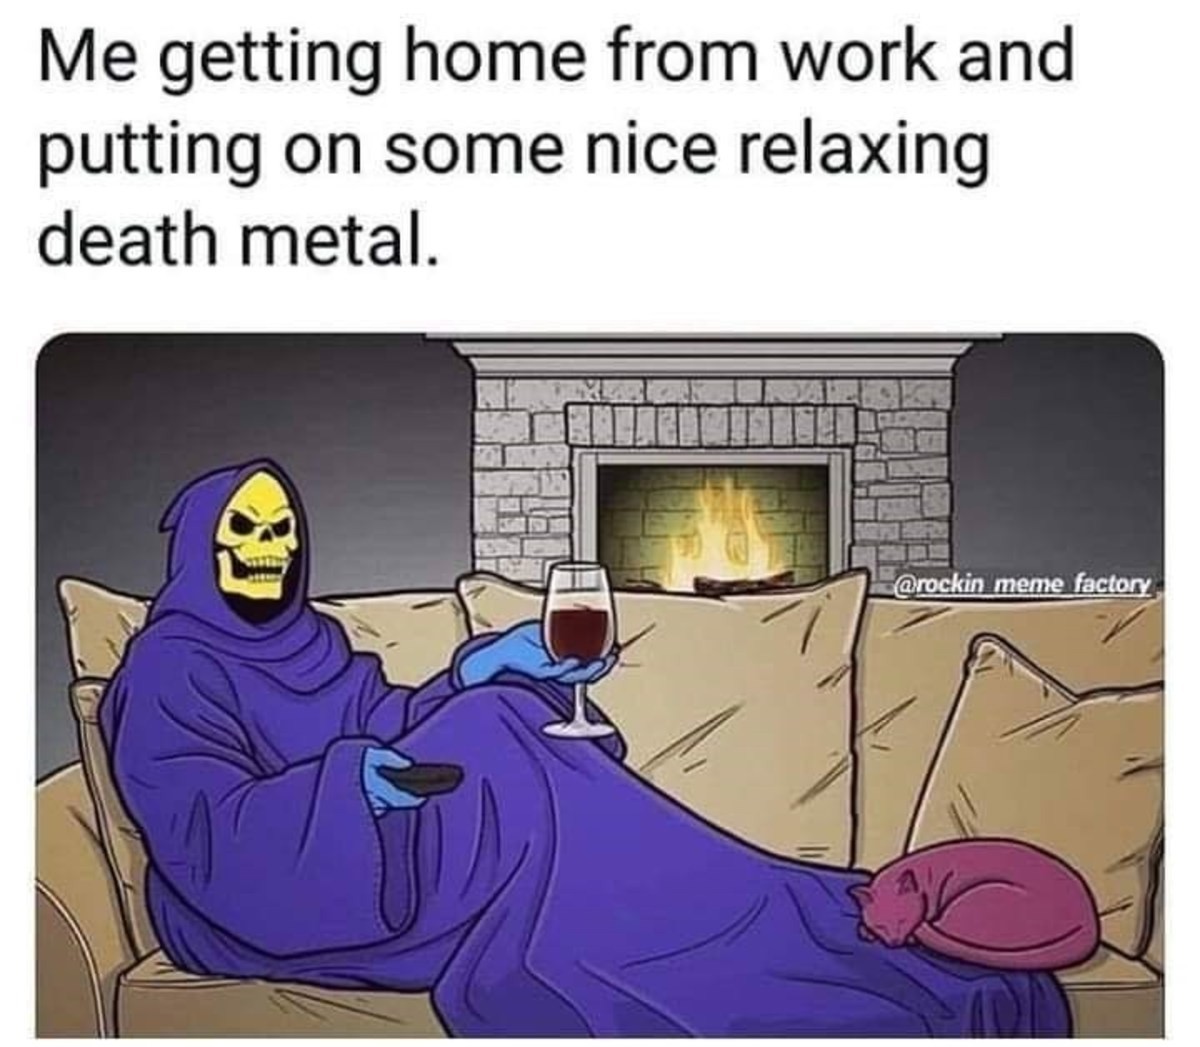 death metal meme - Me getting home from work and putting on some nice relaxing death metal. meme factory